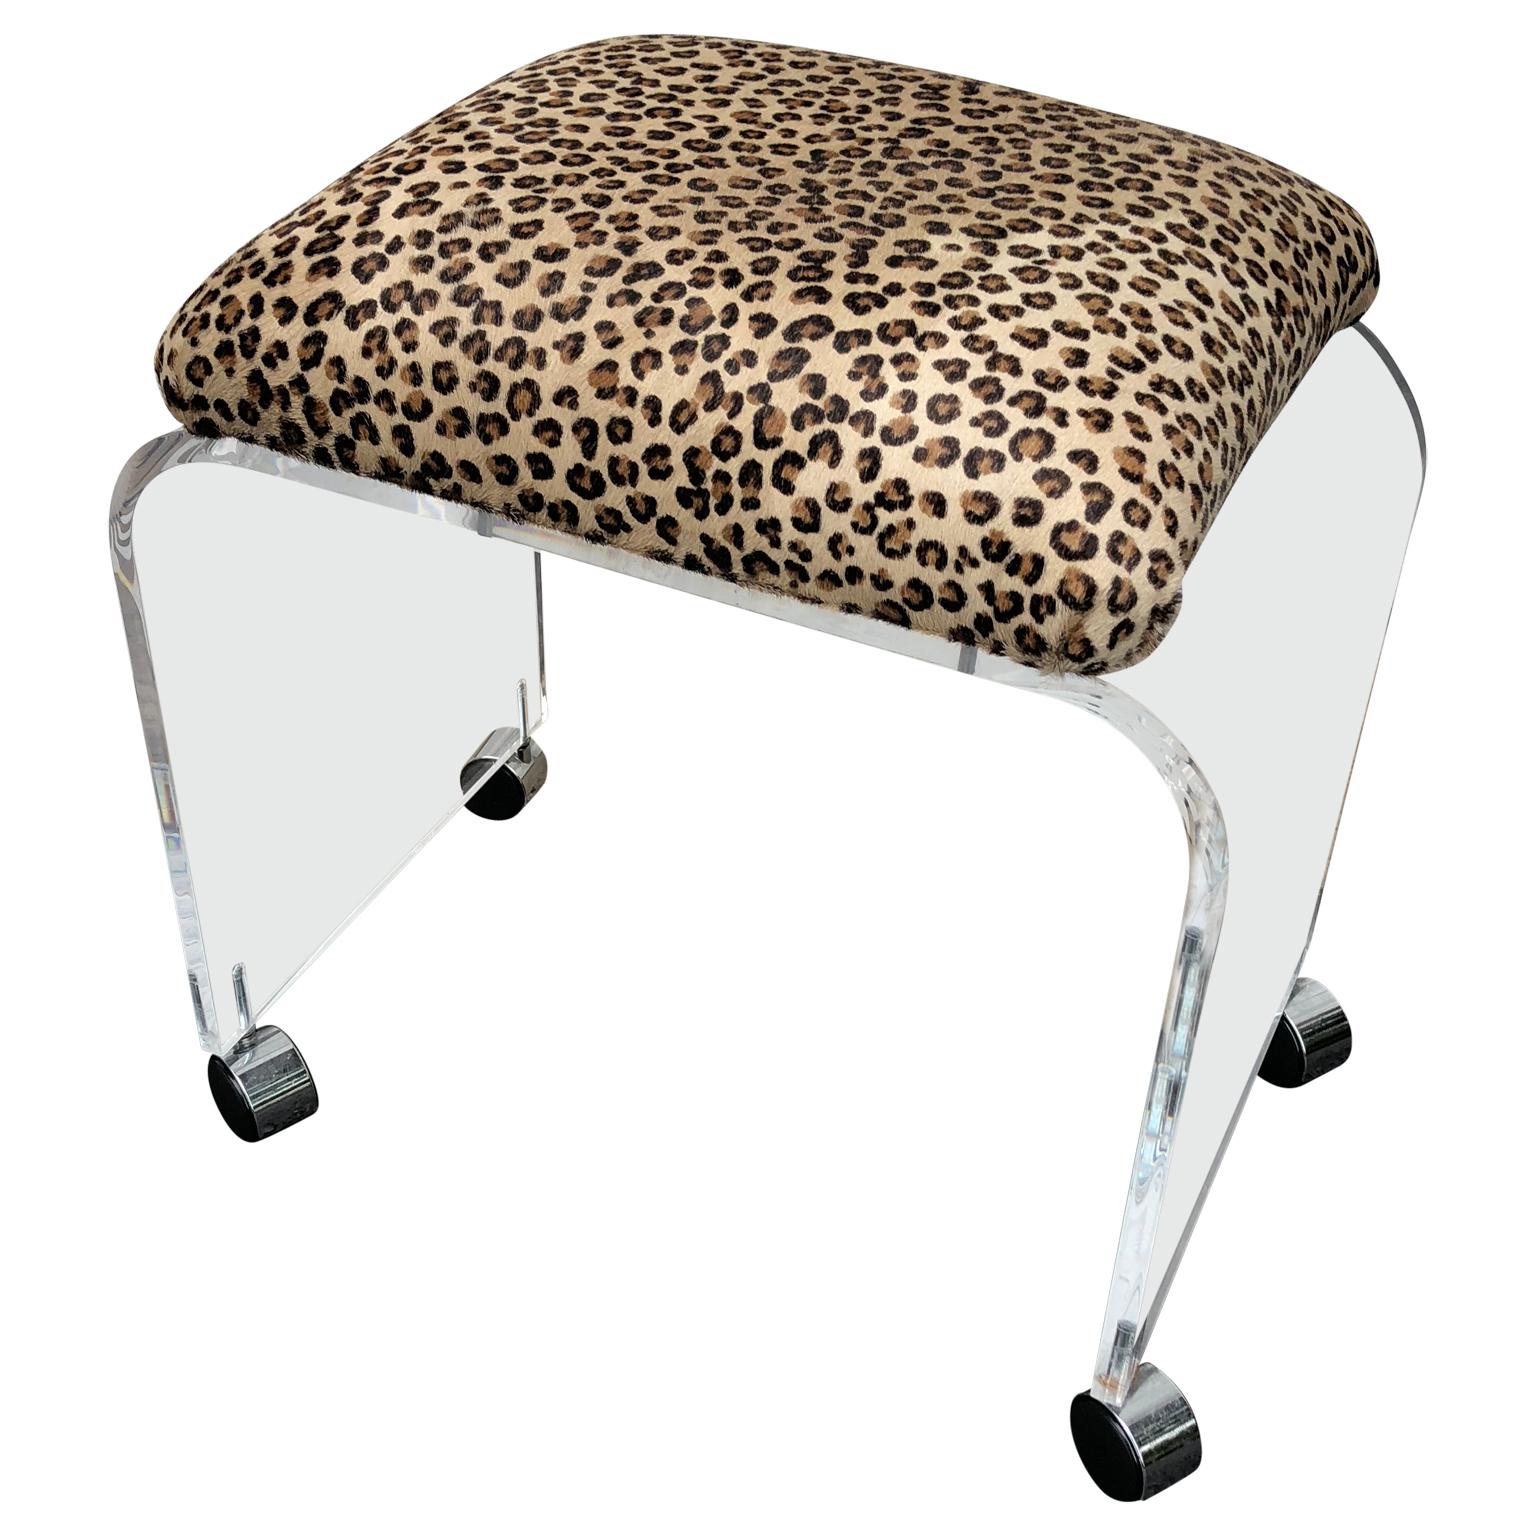 20th Century Mid-Century Modern Waterfall Lucite Stool or Bench with Faux Cheetah Fabric For Sale